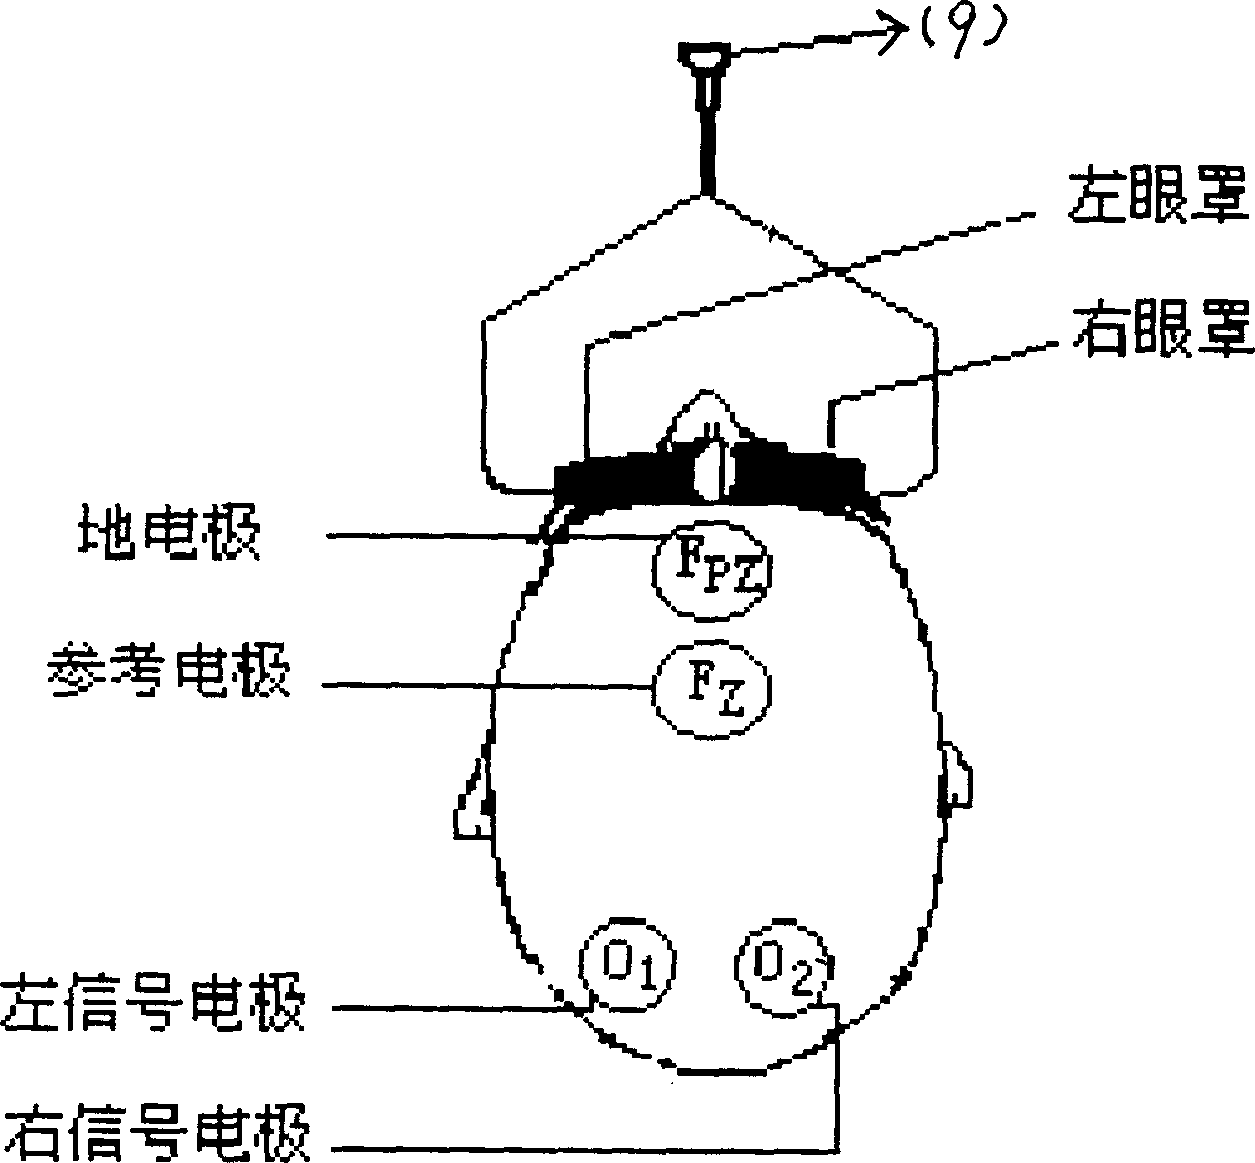 Wound-frce intracranial pressure monitoring method and apparatus